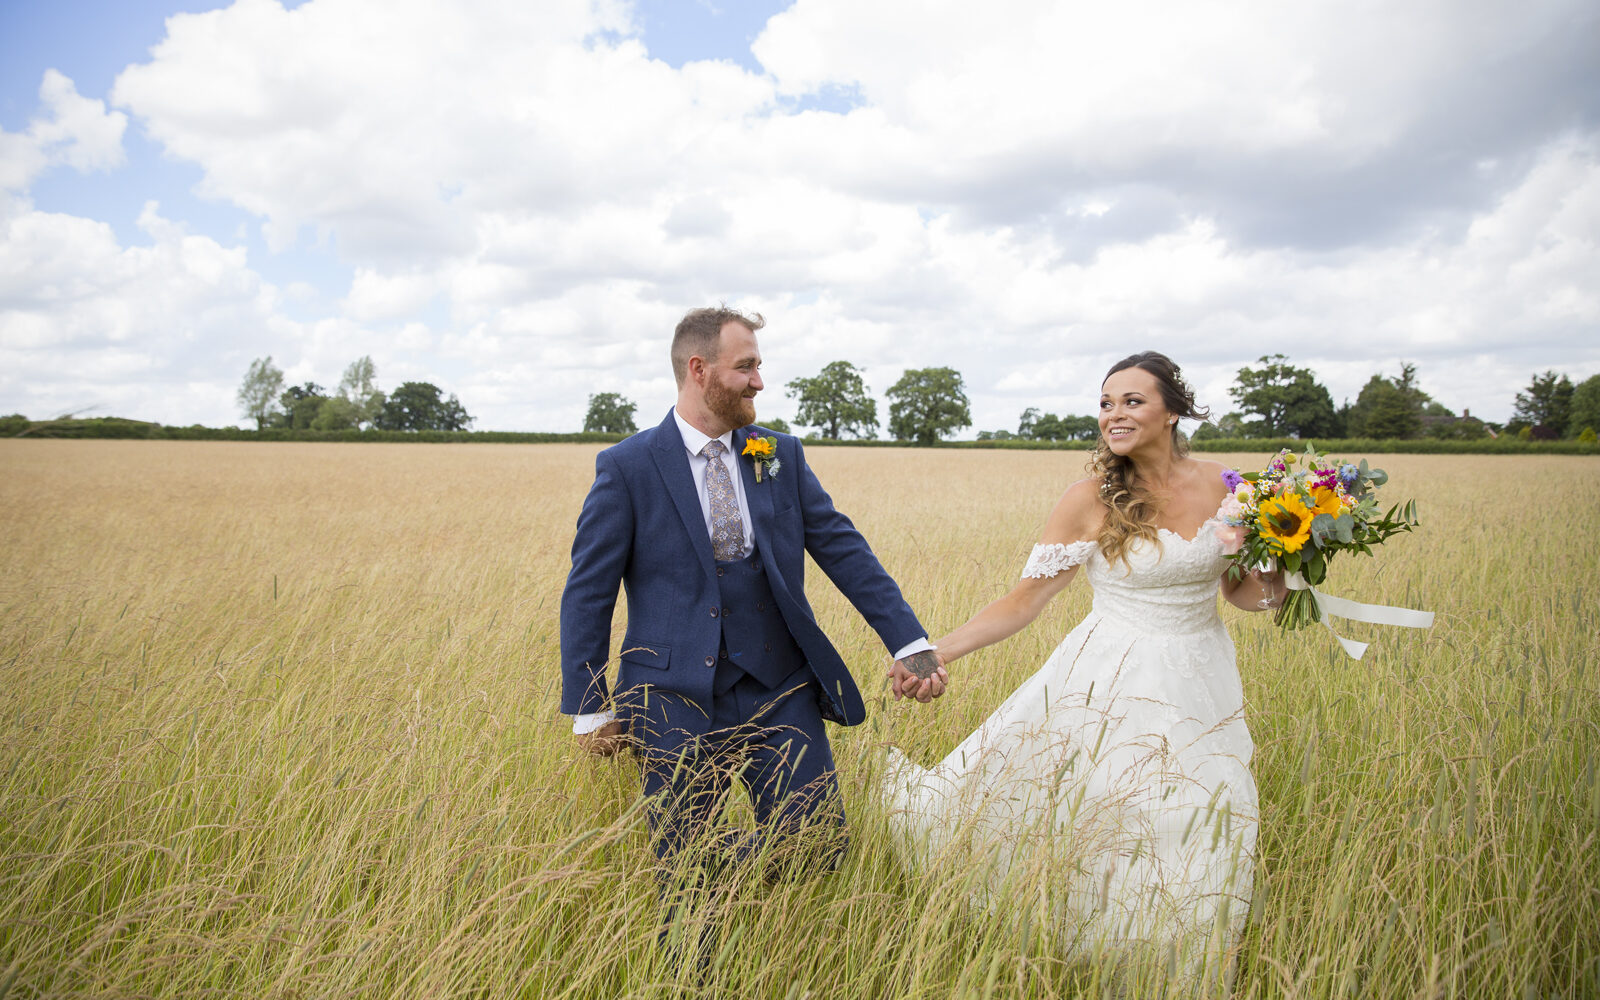 Bride & Groom holding hands walking through a field looking at each other, captured by Kent wedding photographer Victoria Green.